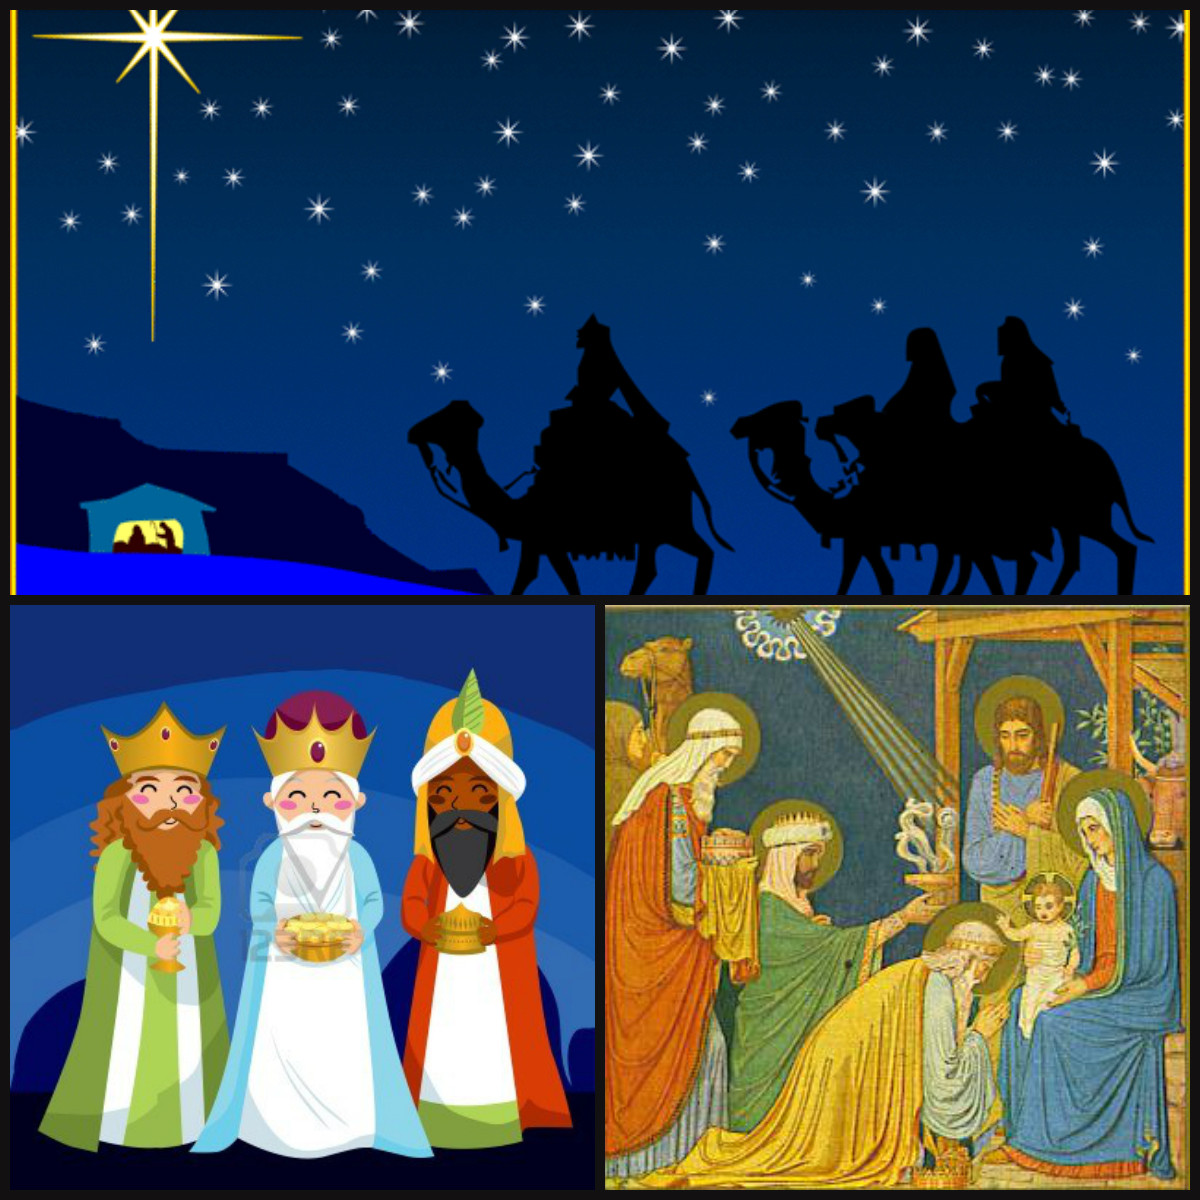 3 Gifts To Baby Jesus
 FOOT PRINTS ON LAND THE THREE KINGS JOURNEY TO SUCCESS